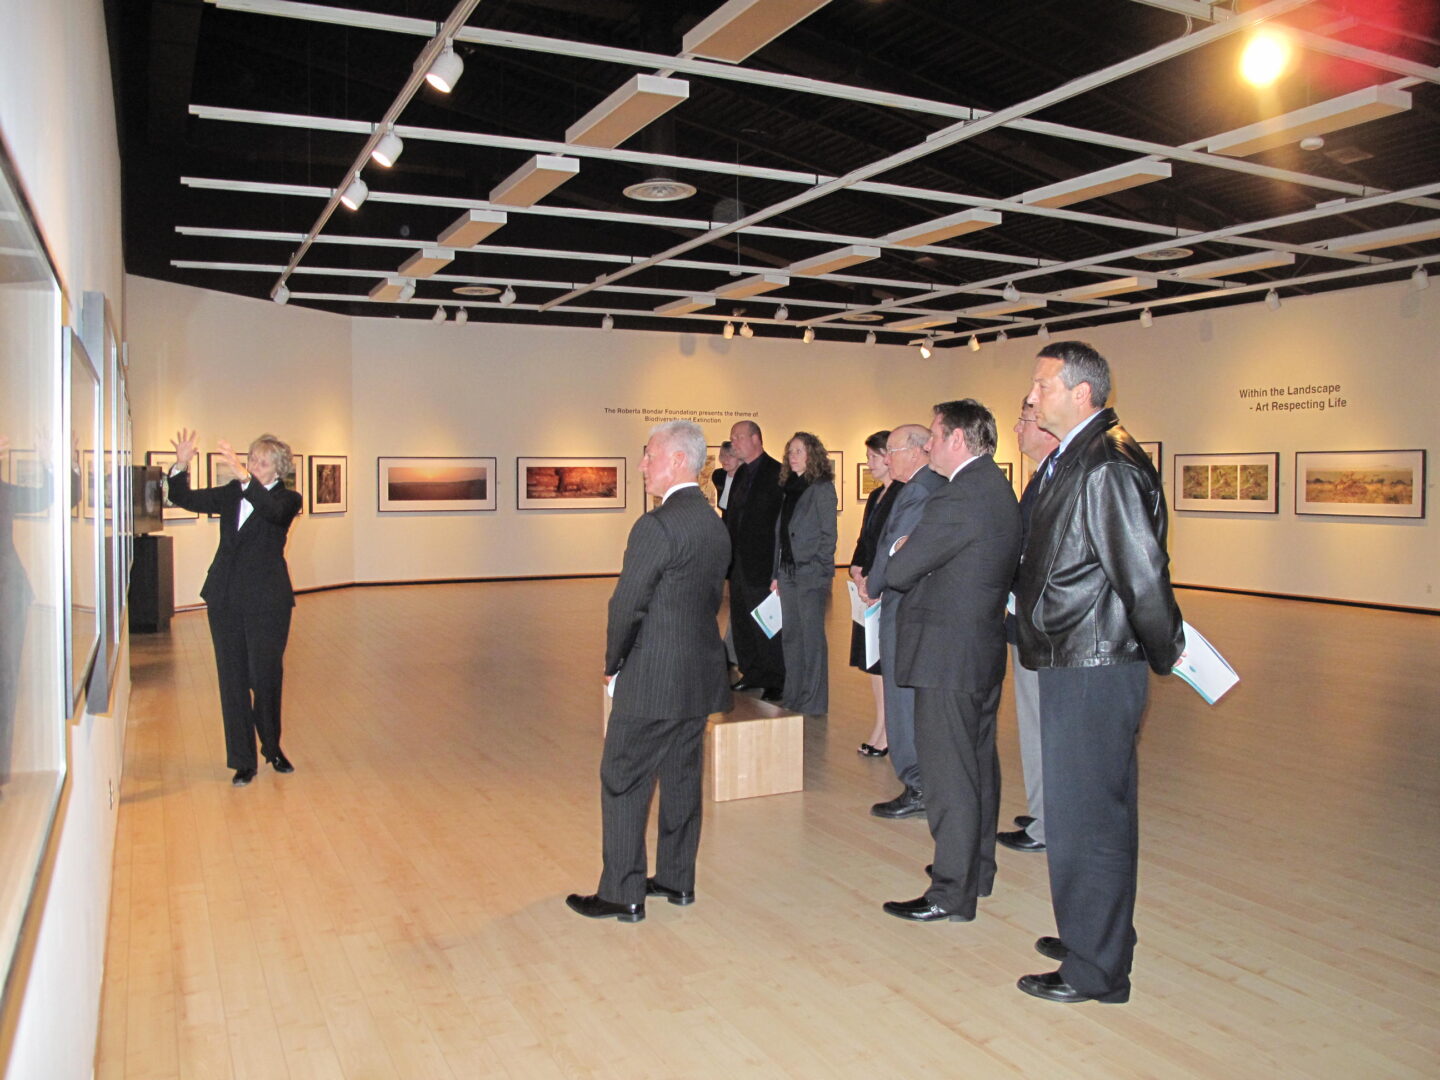 Image of people in gallery